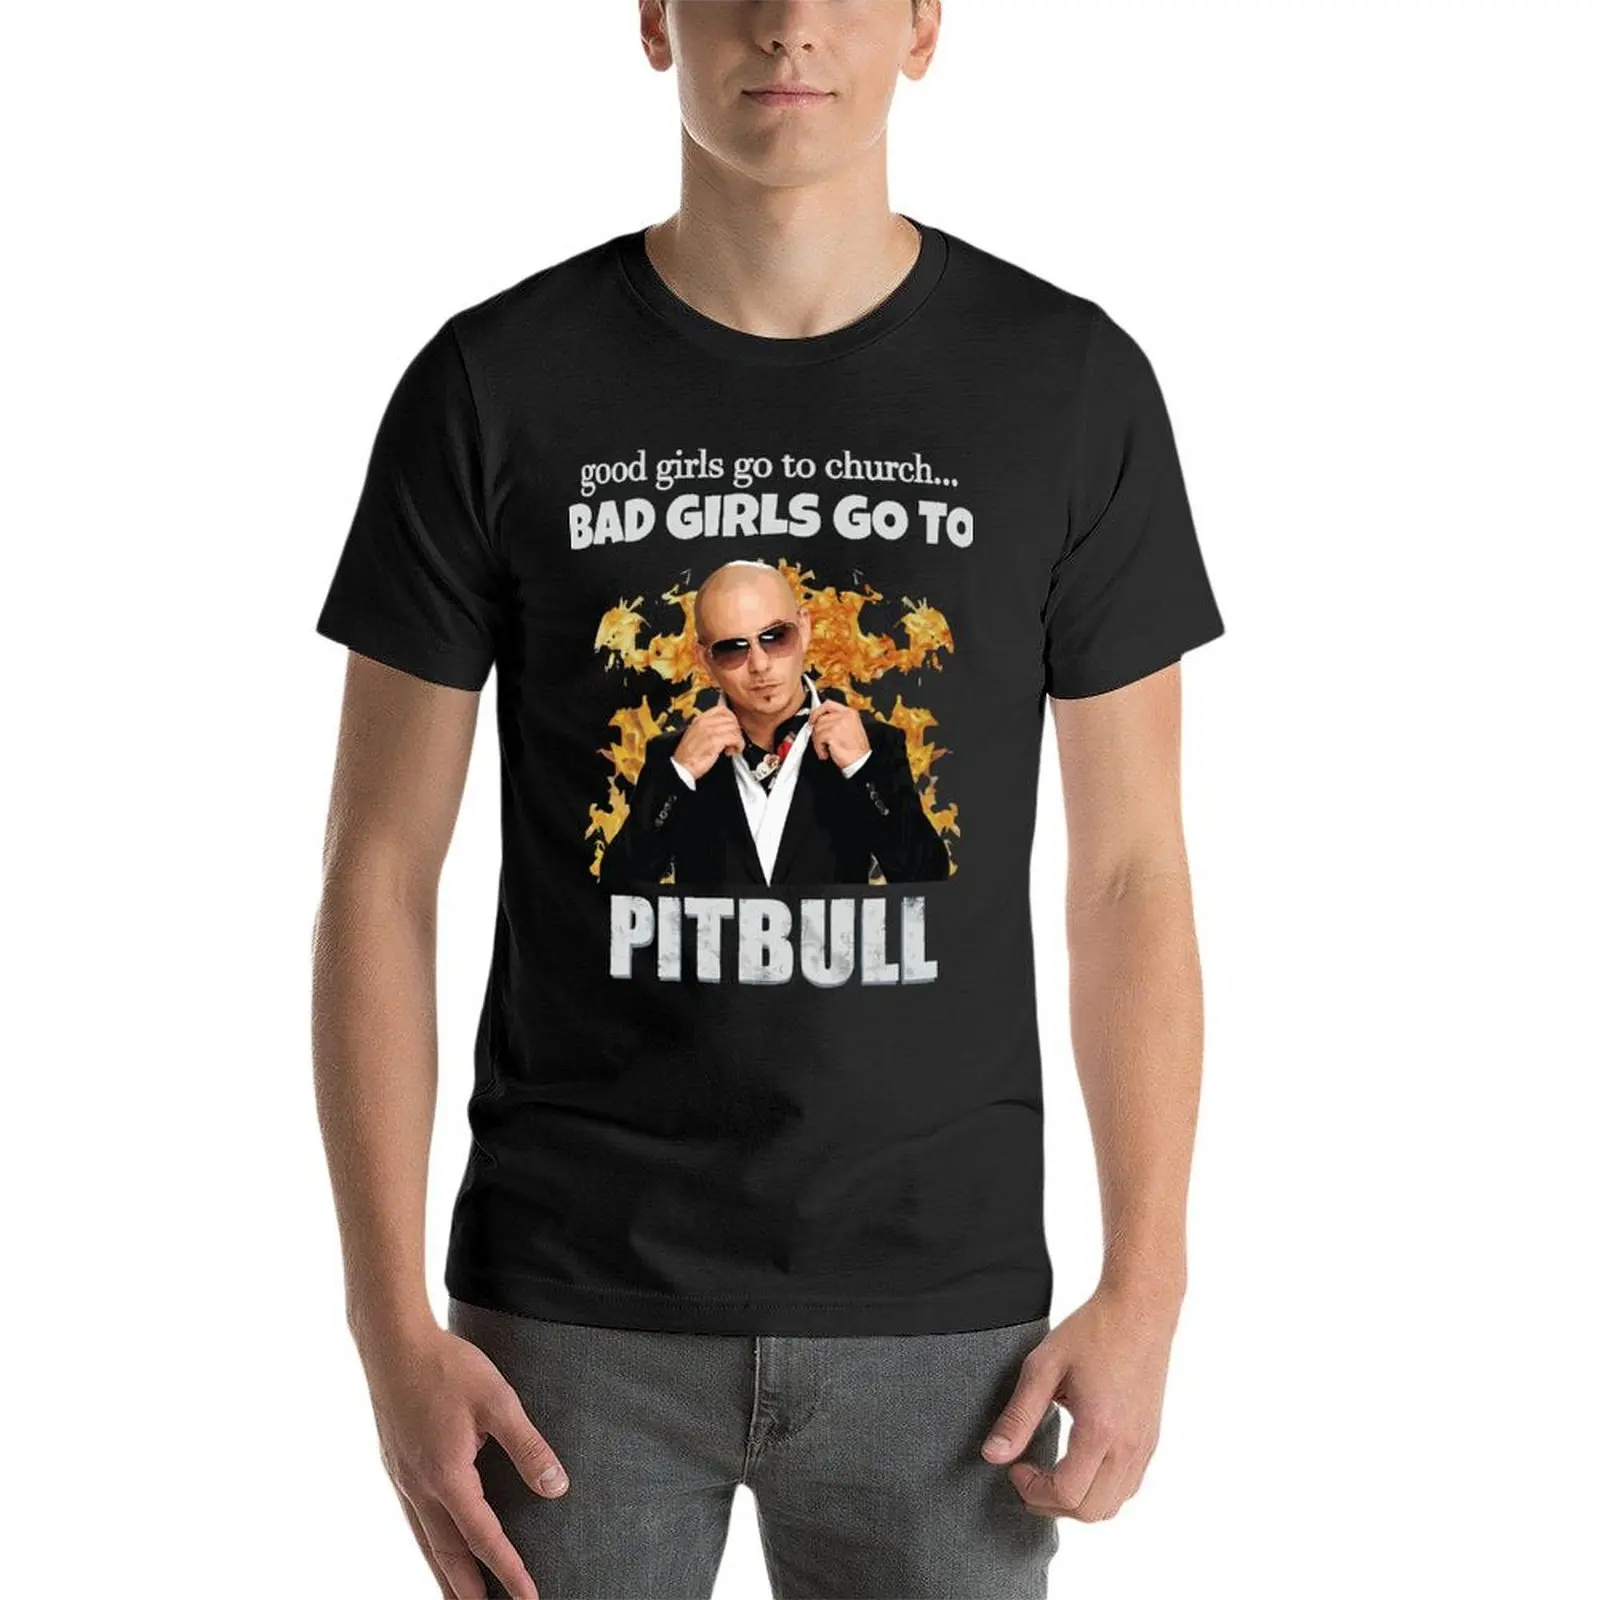 

Good Girls Go To Church Bad Girls Go To Pitbull Oversize T Shirts For Men Clothing 100% Cotton Streetwear Big Size Tops Tee